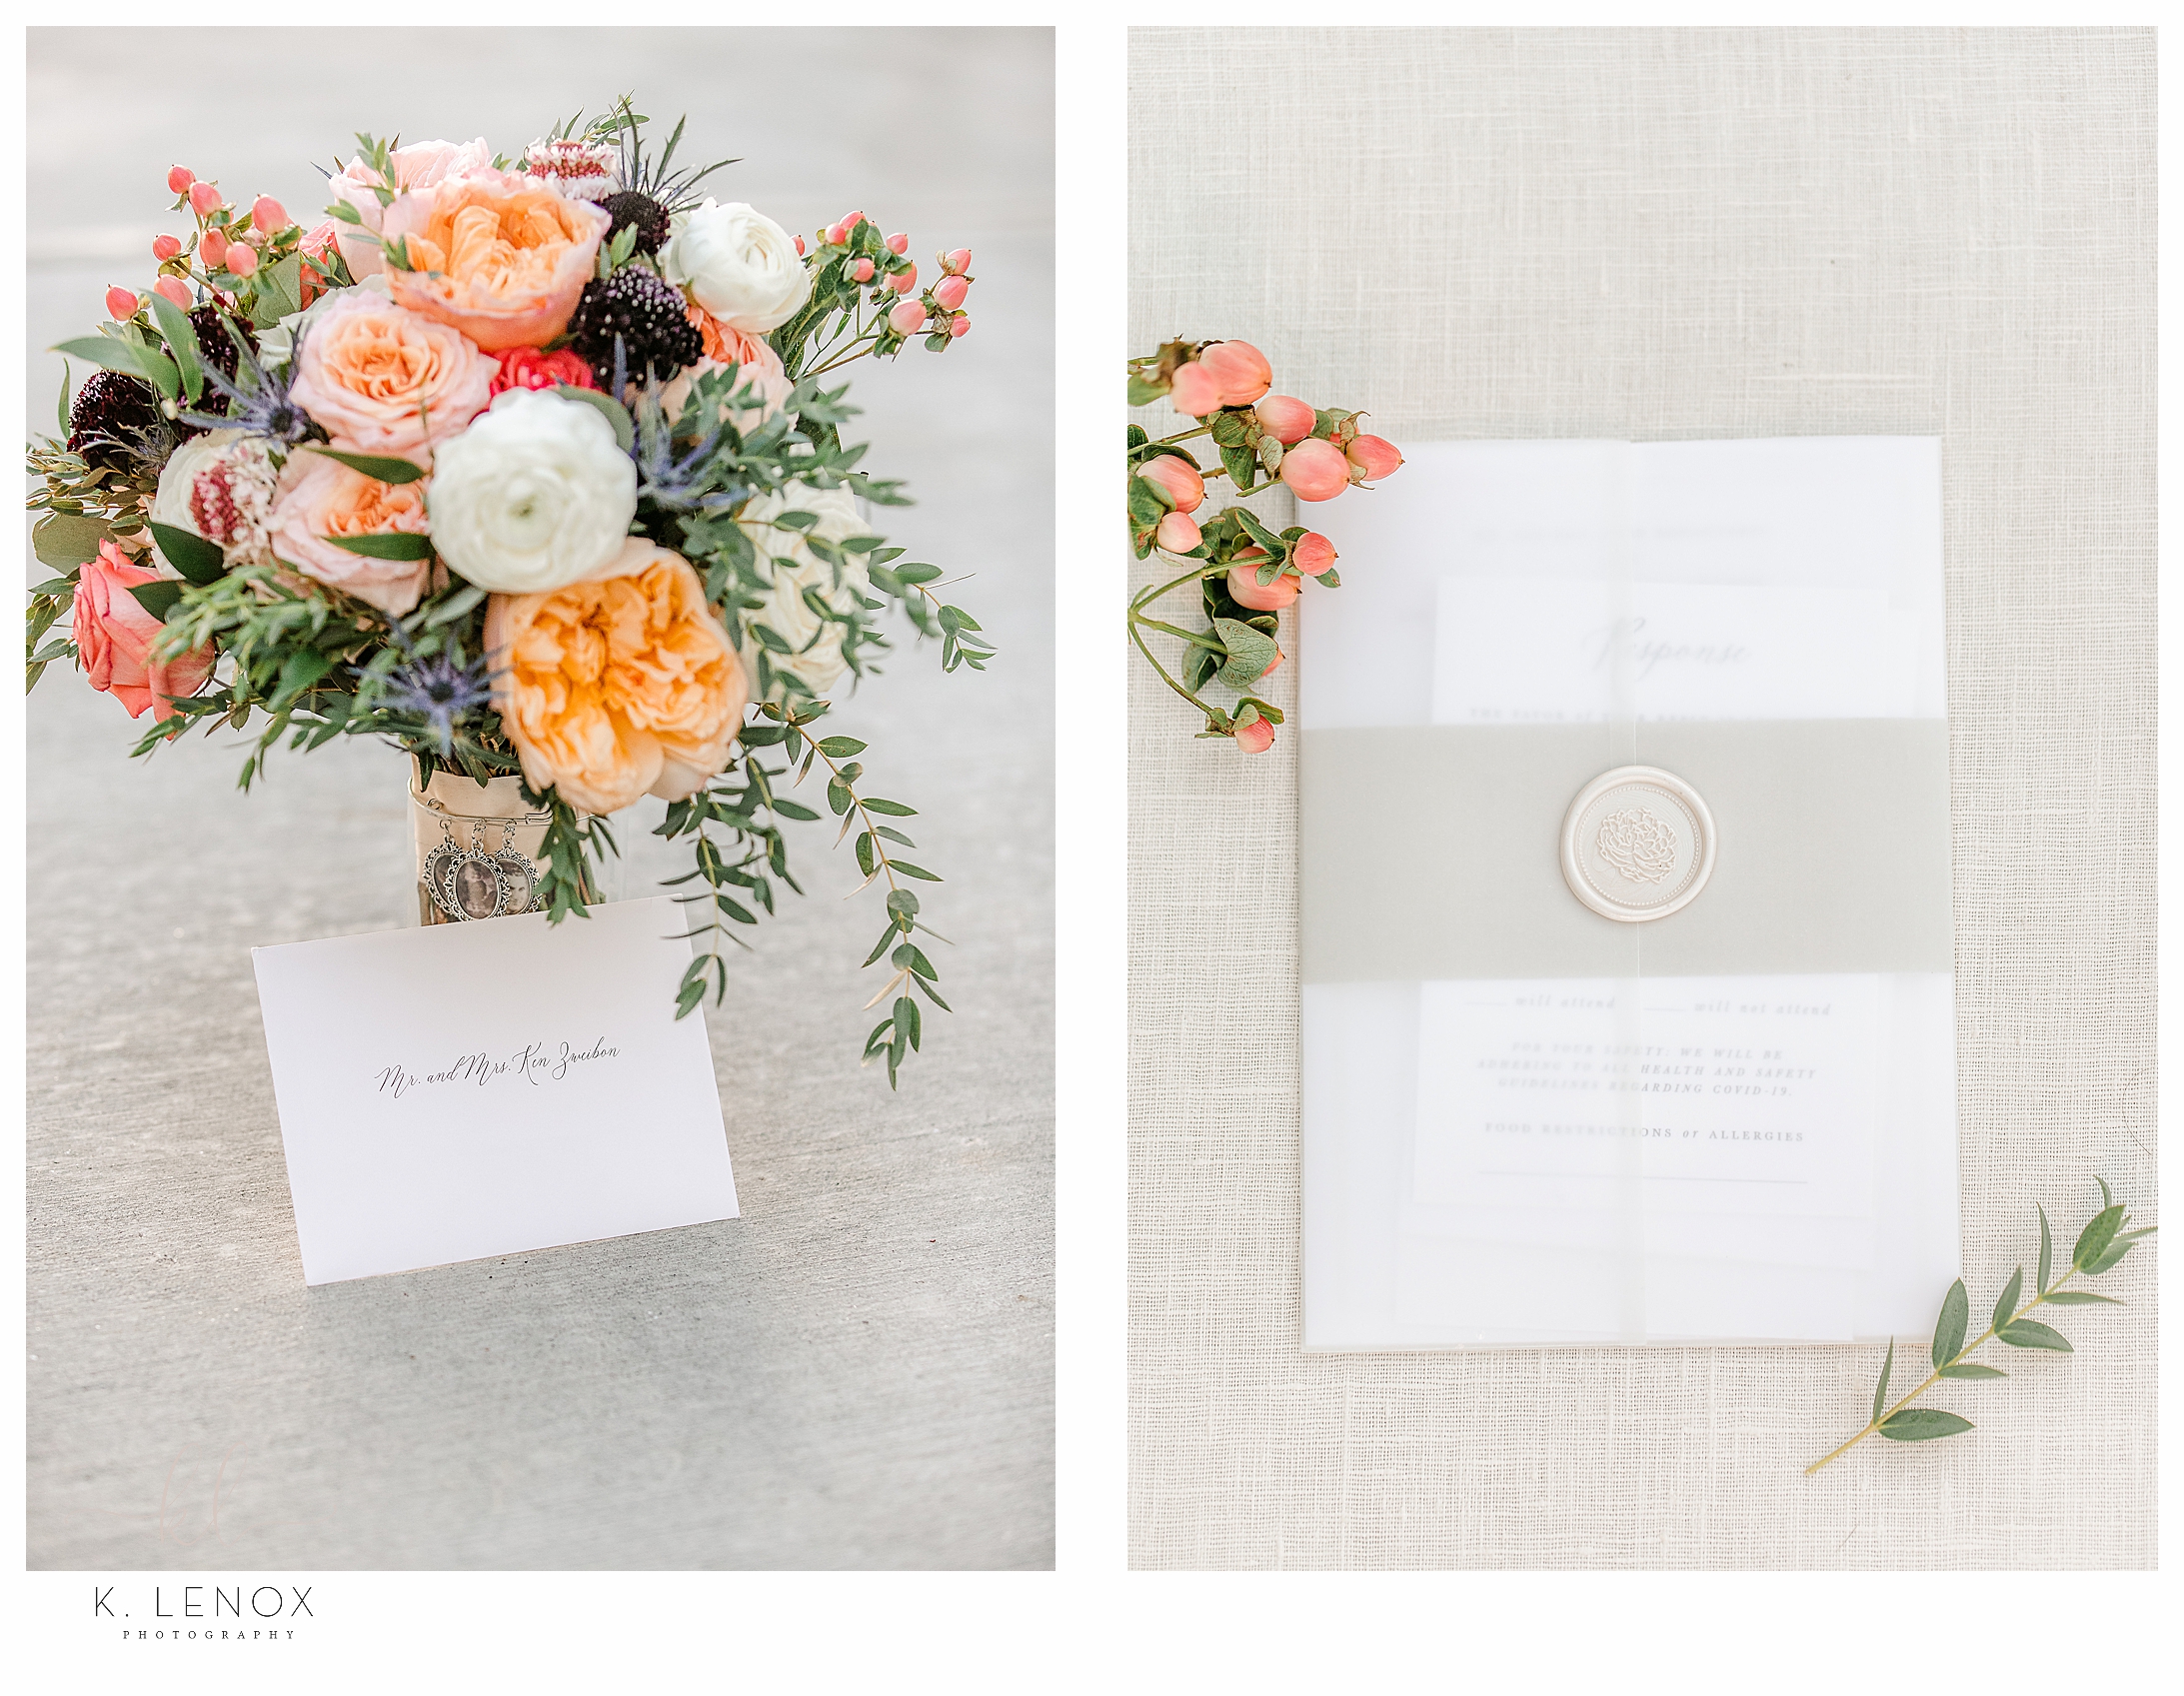 Flowers, Bridal bouquet and a wedding invitation. 